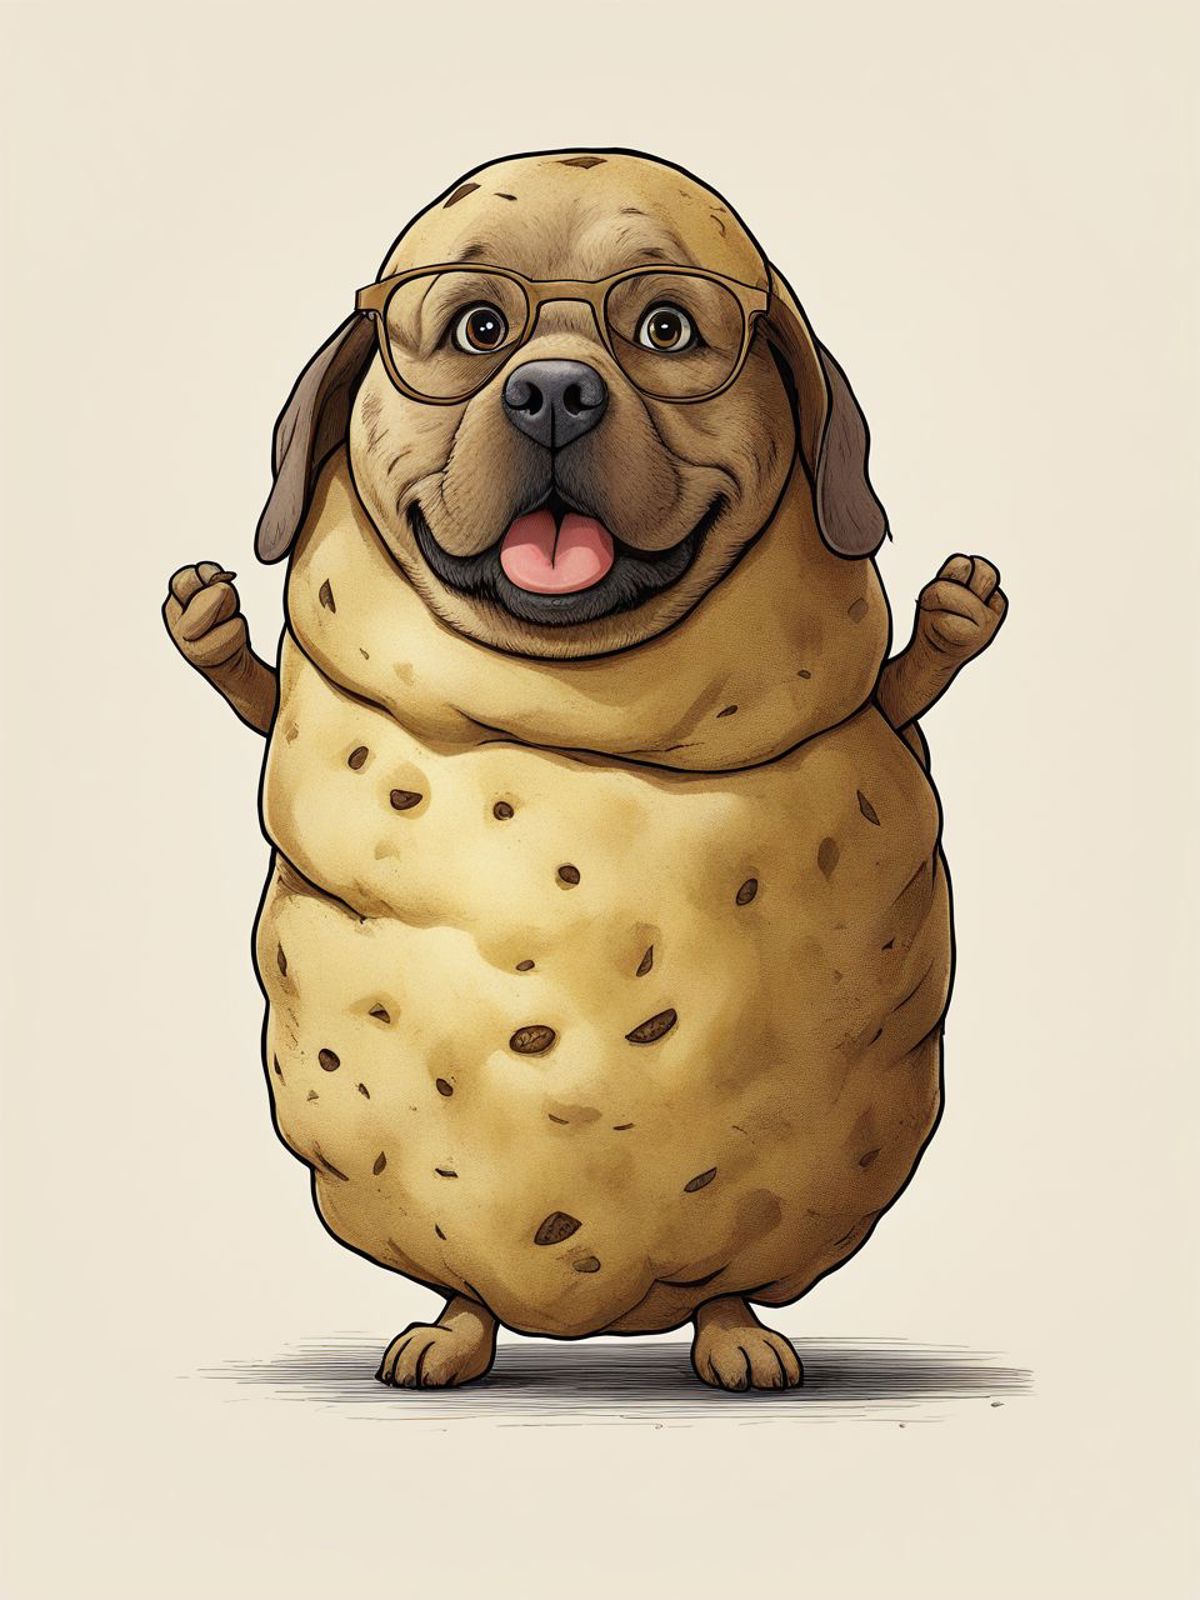 A cartoon dog with glasses and a potato for a body.